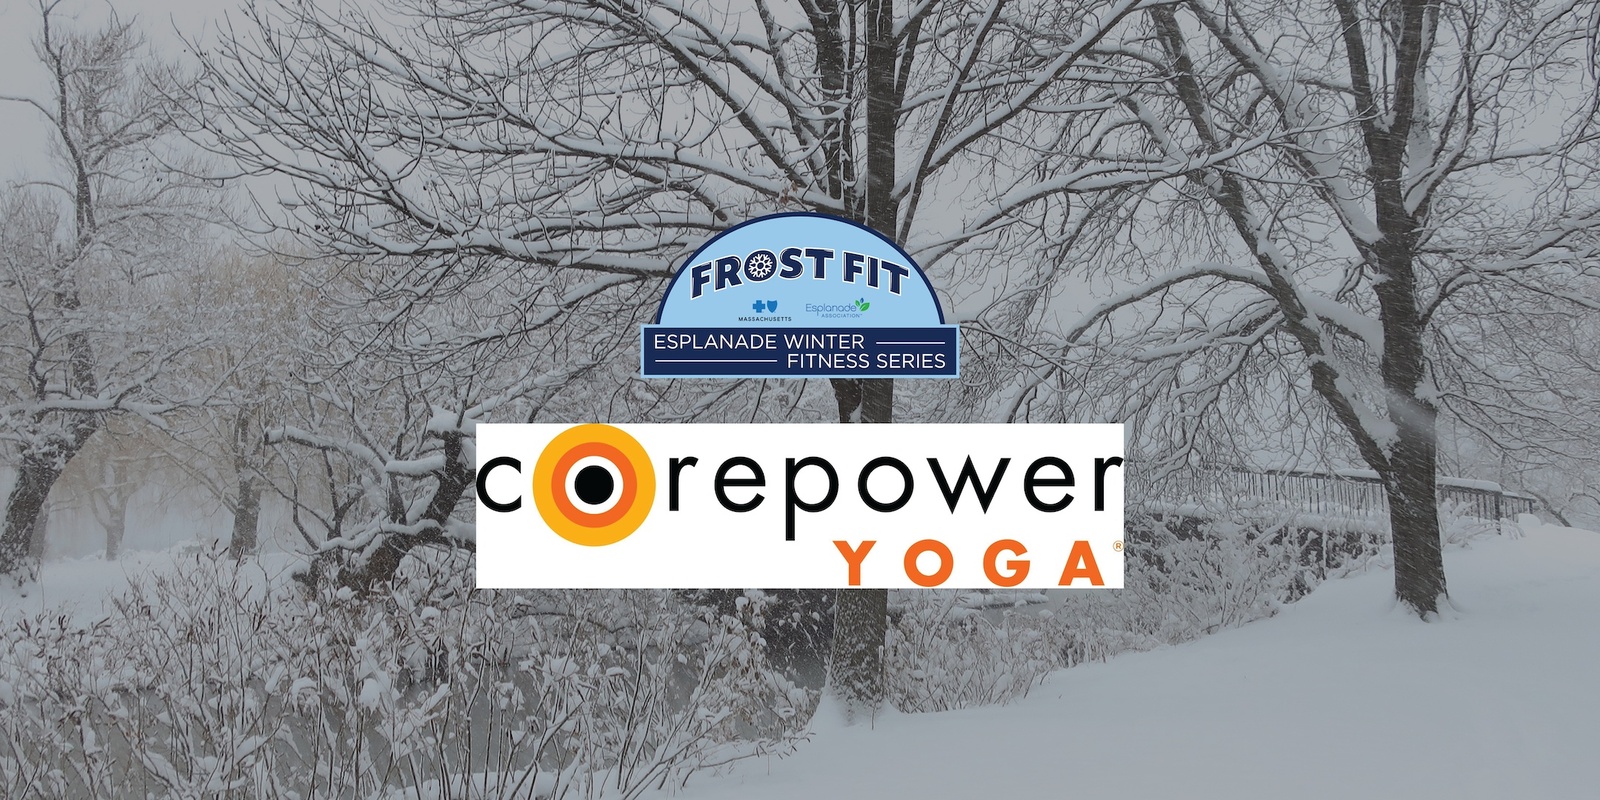 Denver-based CorePower Yoga to open first studio in New York City